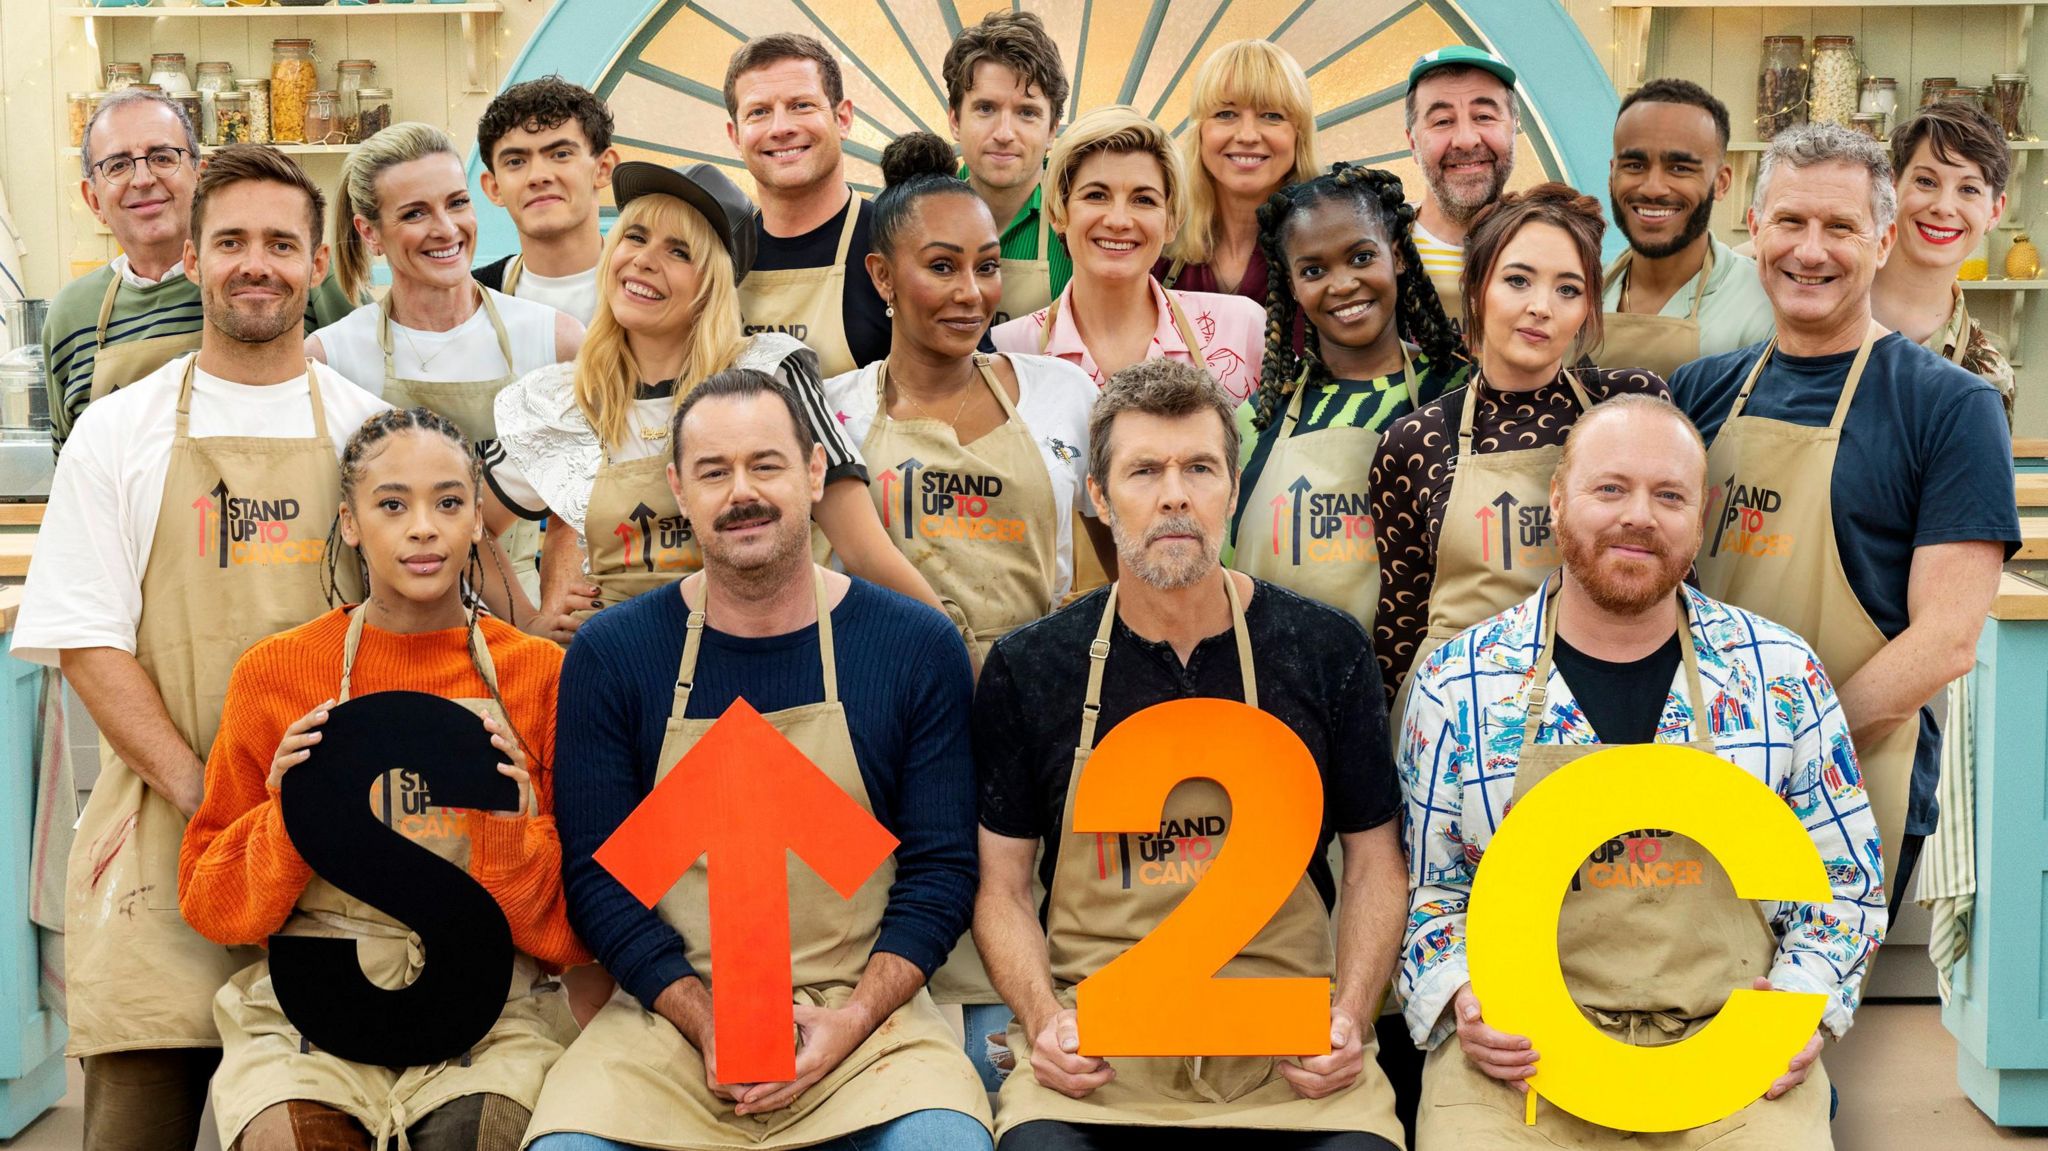 Undated handout combination photo issued by Channel 4 of (Back Row) Rev Richard Coles, Joe Locke, Dermot O'Leary, Greg James, Sara Cox, David O'Doherty, Munya Chawawa, Suzi Ruffell, (Middle row) Paloma Faith, Gabby Logan, Spencer Matthews, Mel B, Jodie Whittaker, Oti Mabuse, Fern Brady, Adam Hills, (Front row) Yinka Bokinni, Danny Dyer, Rhod Gilbert, Leigh Francis, the contestants for a new series of The Great Celebrity Bake Off for Stand Up To Cancer, which will be available to watch and stream on Channel 4 later this year. Picture date: Monday February 5, 2024. PA Photo. Stand Up To Cancer UK, the joint national fundraising campaign between Channel 4 and Cancer Research UK, has raised millions of pounds to fund life-saving cancer research